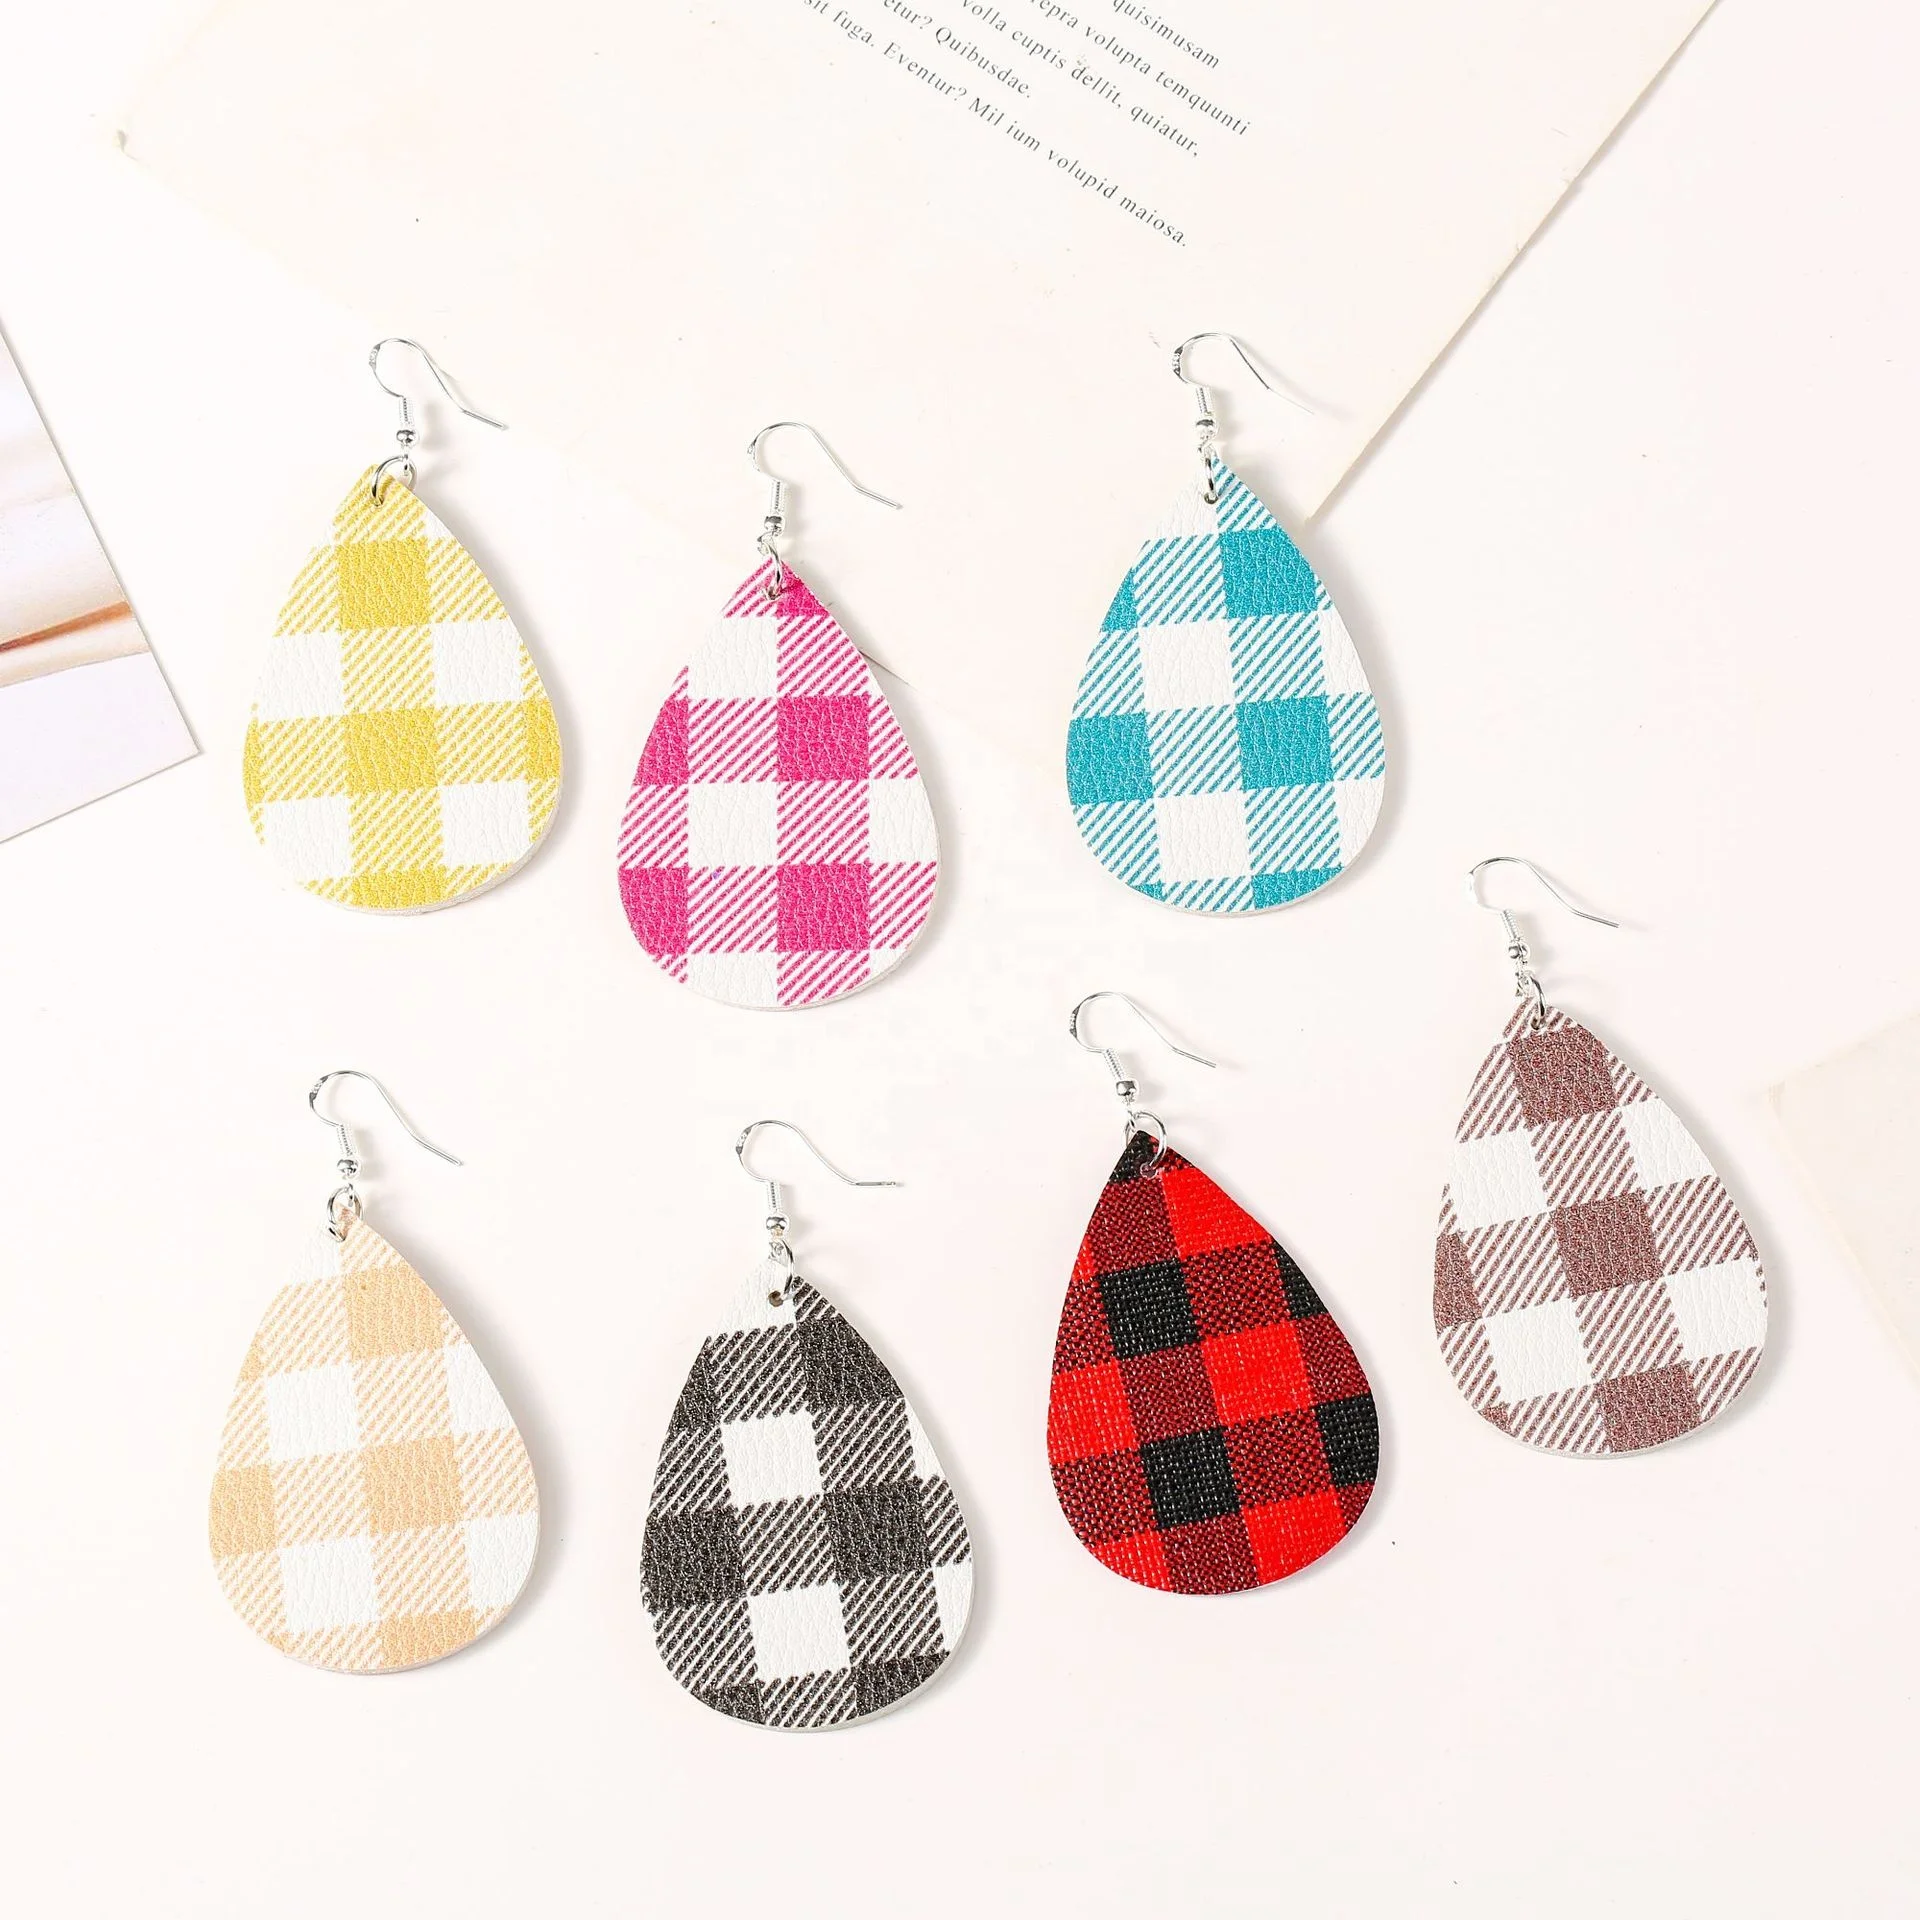 

Wholesale Pop Buffalo Plaid PU Leather Earrings Teardrop Fashion Summer Celebrity Checked Leather Earrings For Women, As picture show